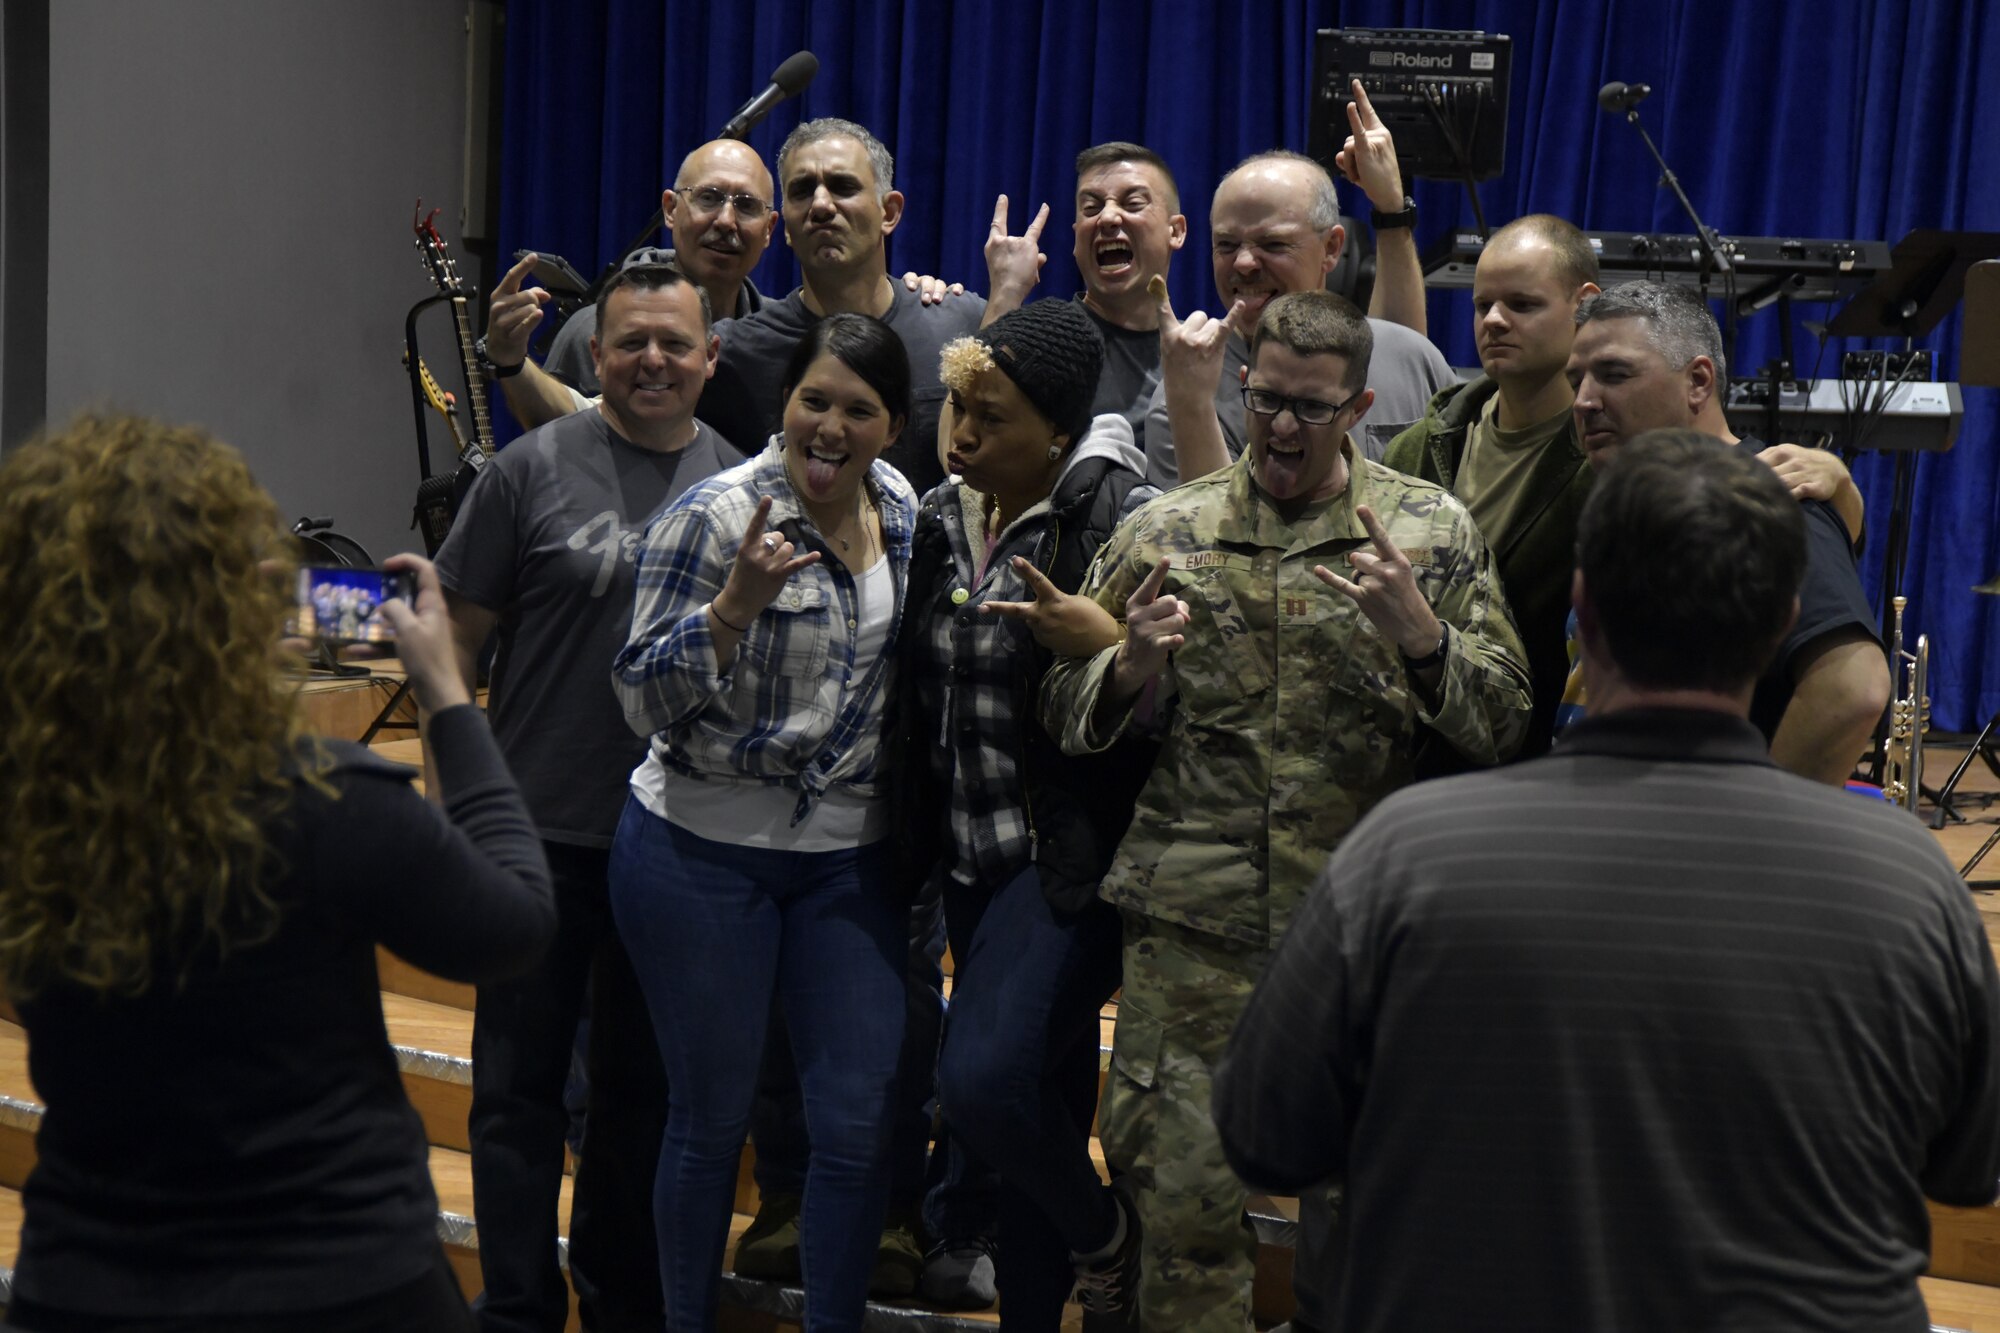 Air Forces Central Command Band members take a photo with an audience member after performing at The Rock theater at Ali Al Salem Air Base, Kuwait January 3, 2020. These dynamic musicians perform and tour in small ensembles throughout the AOR to positively promote troop morale, diplomacy and outreach to host nation communities. This team is coming from the Pennsylvania Air National Guard. (U.S. Air Force photo by Tech. Sgt. Alexandre Montes)